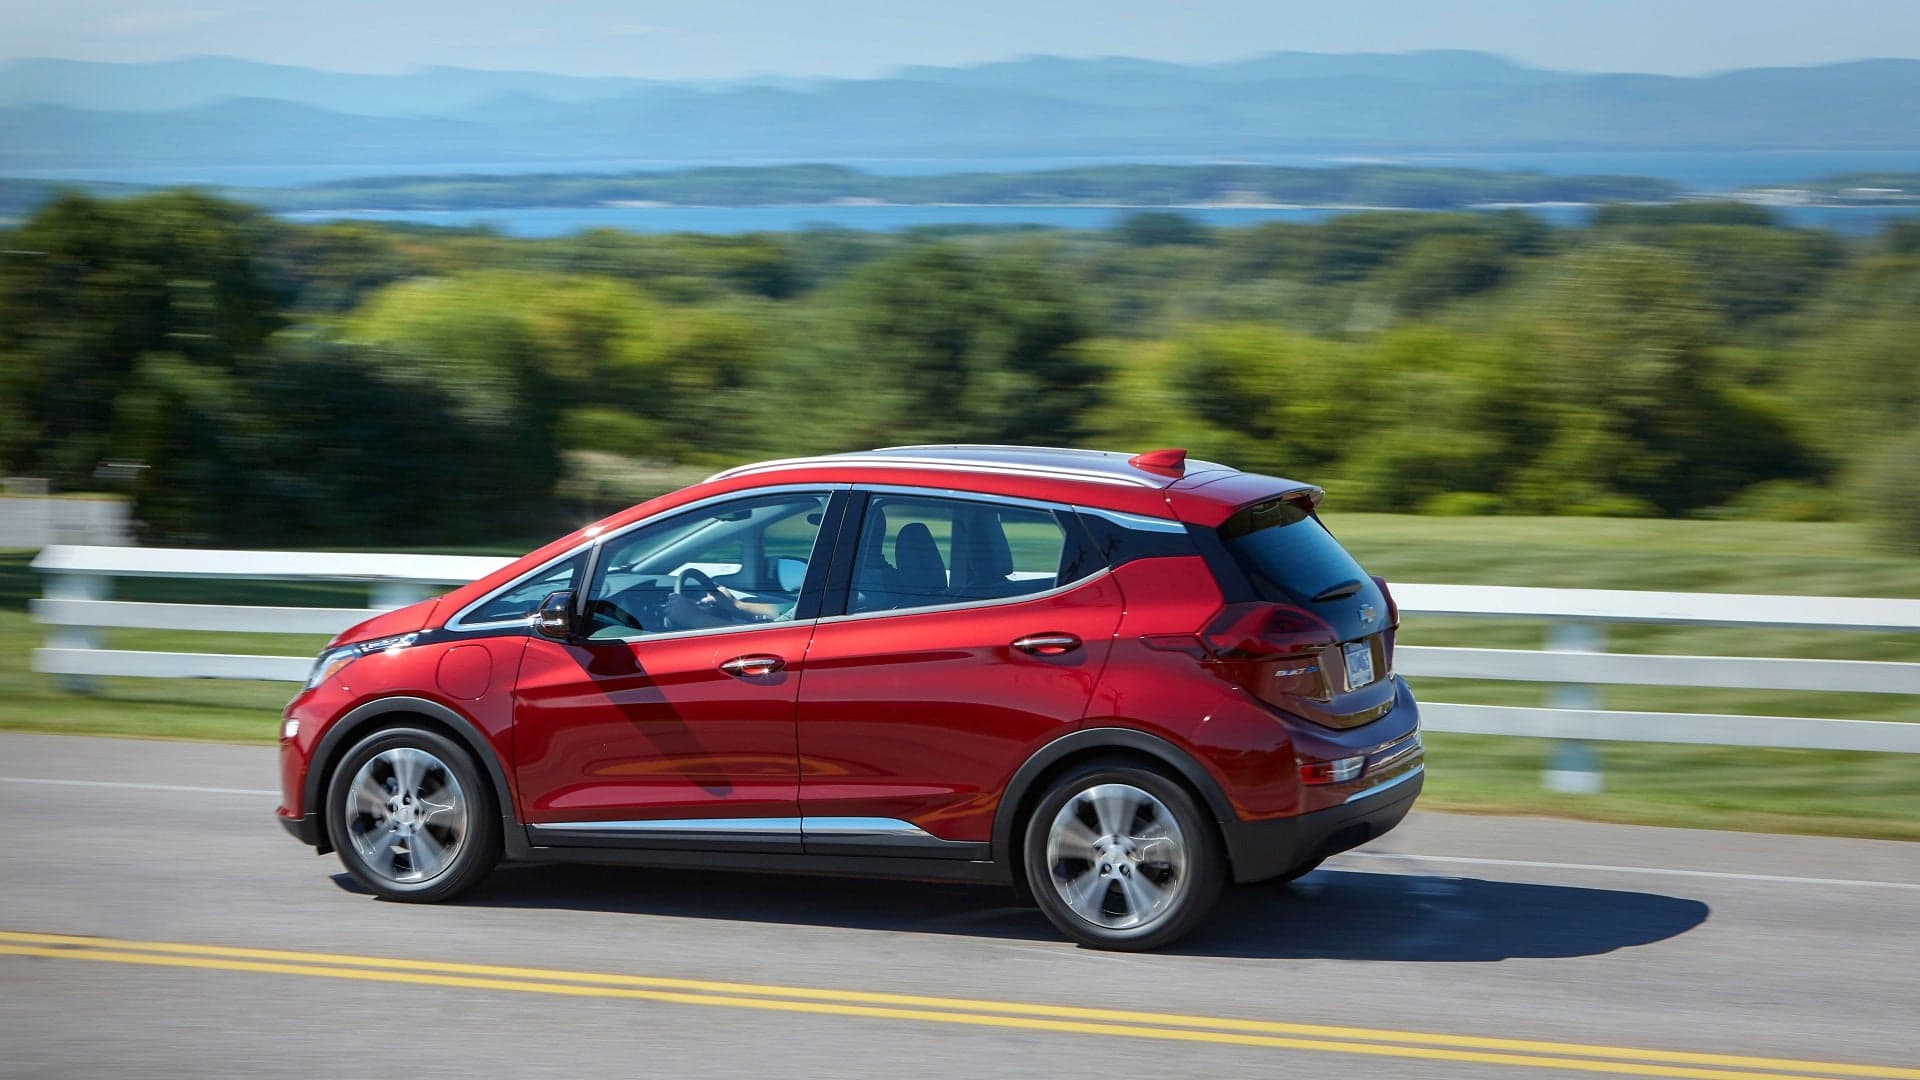 2020 Chevy Bolt Leases Are Dropping as Low as $49/Month with New Models Coming Soon